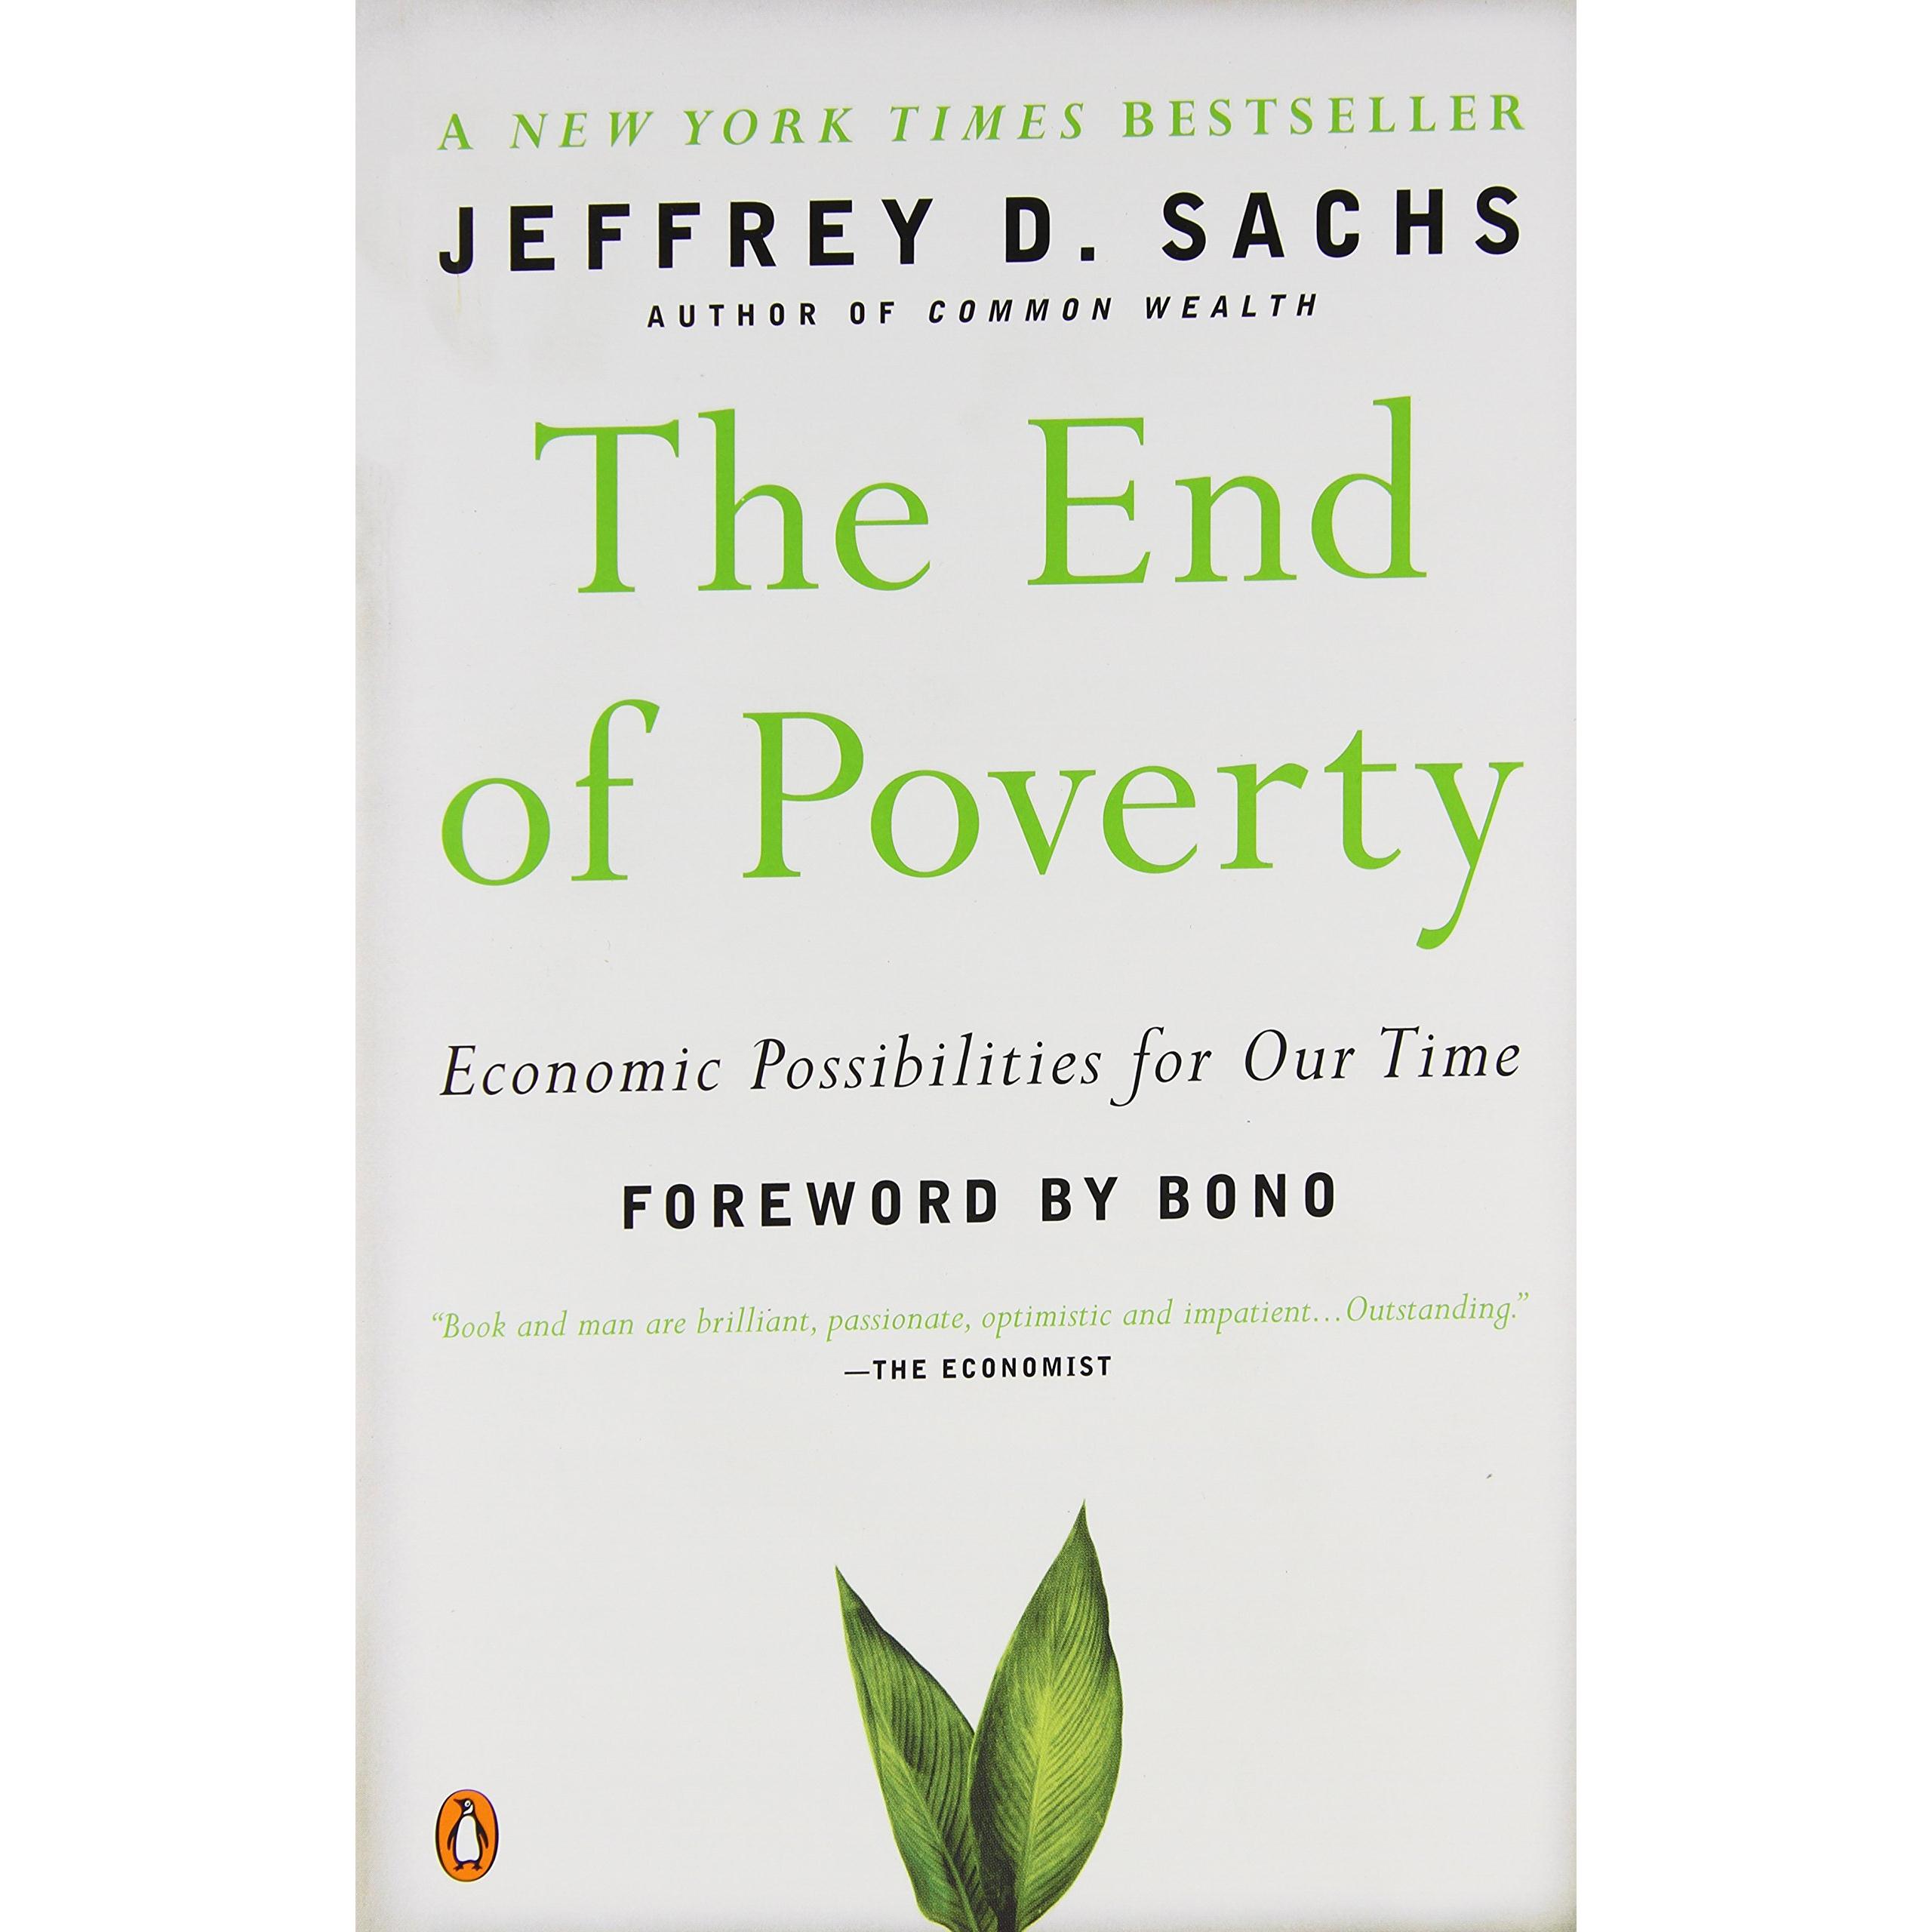 Poverty:　of　for　The　Economic　Our　End　Possibilities　Time